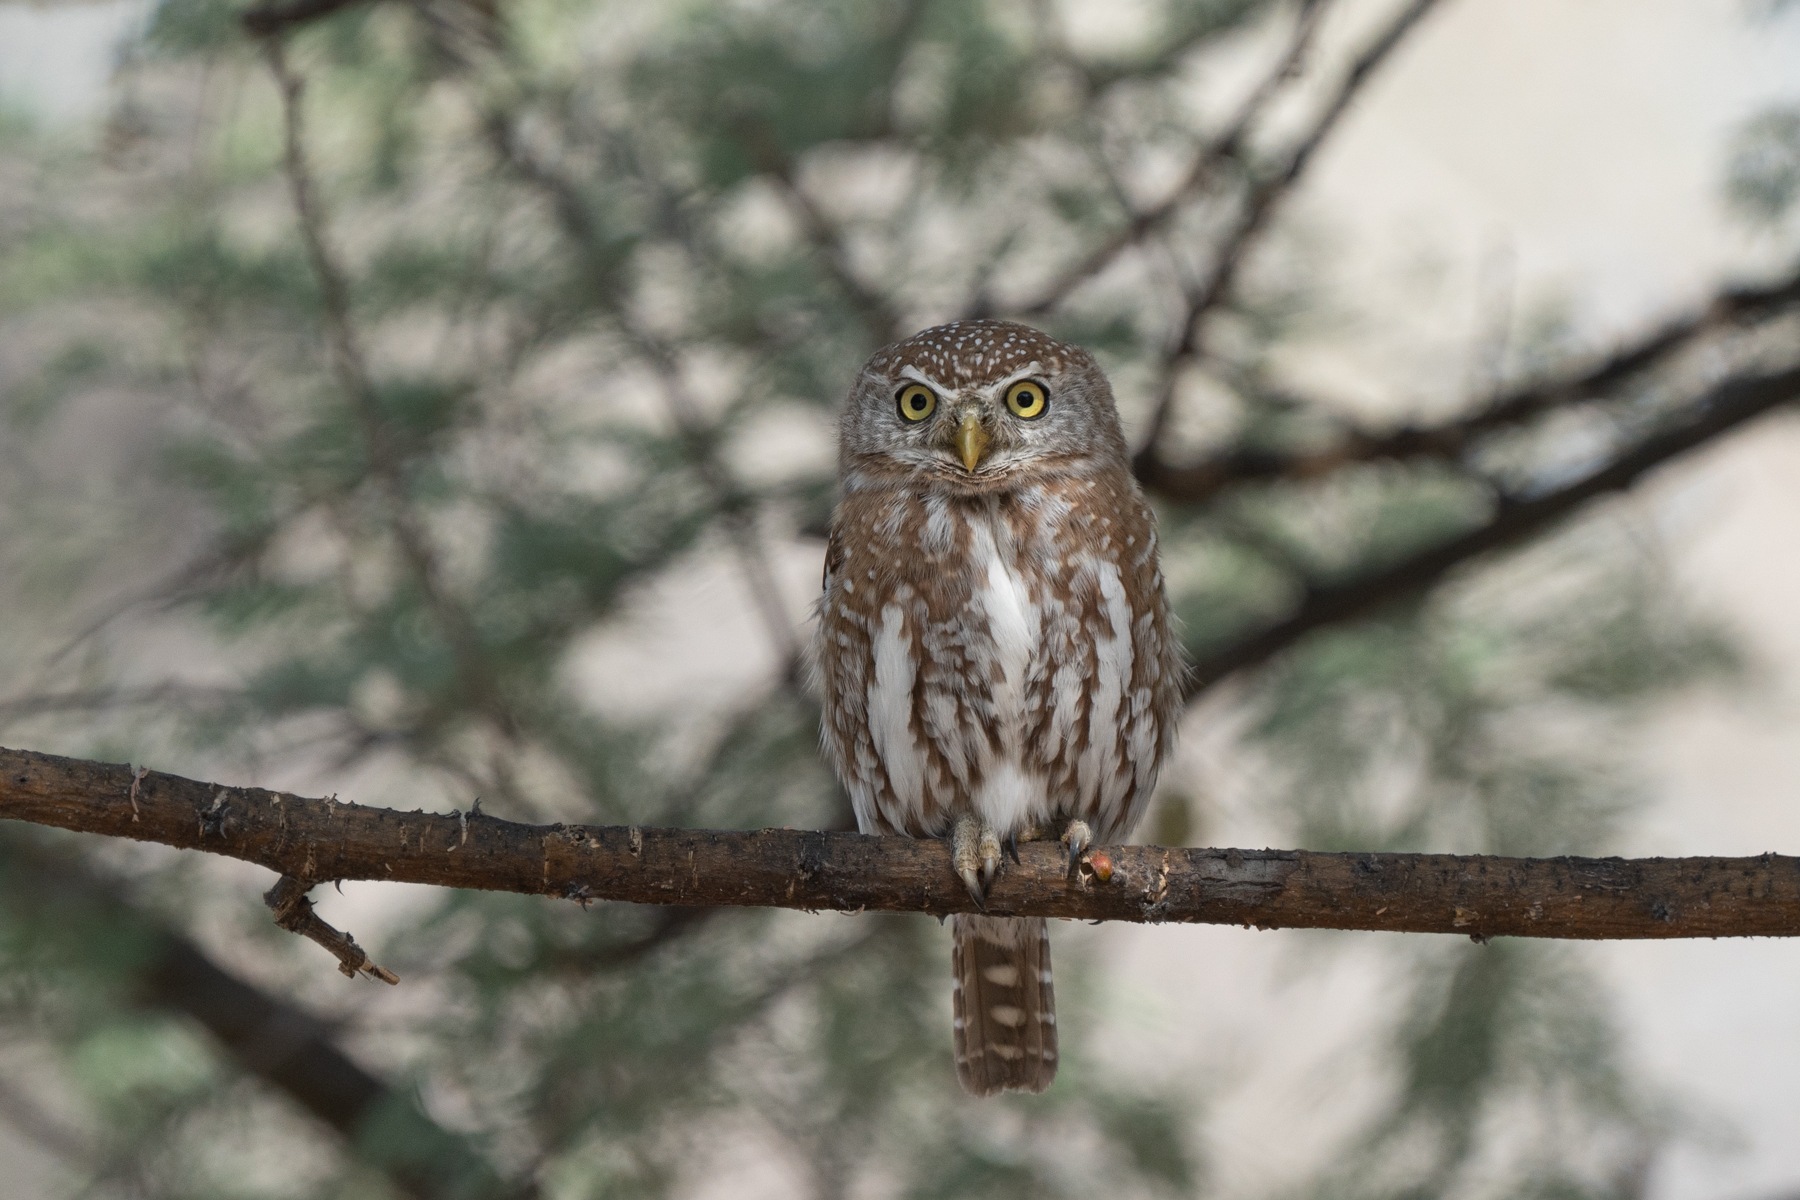 Pearl-spotted Owlet on our Namibia wildlife photography tour